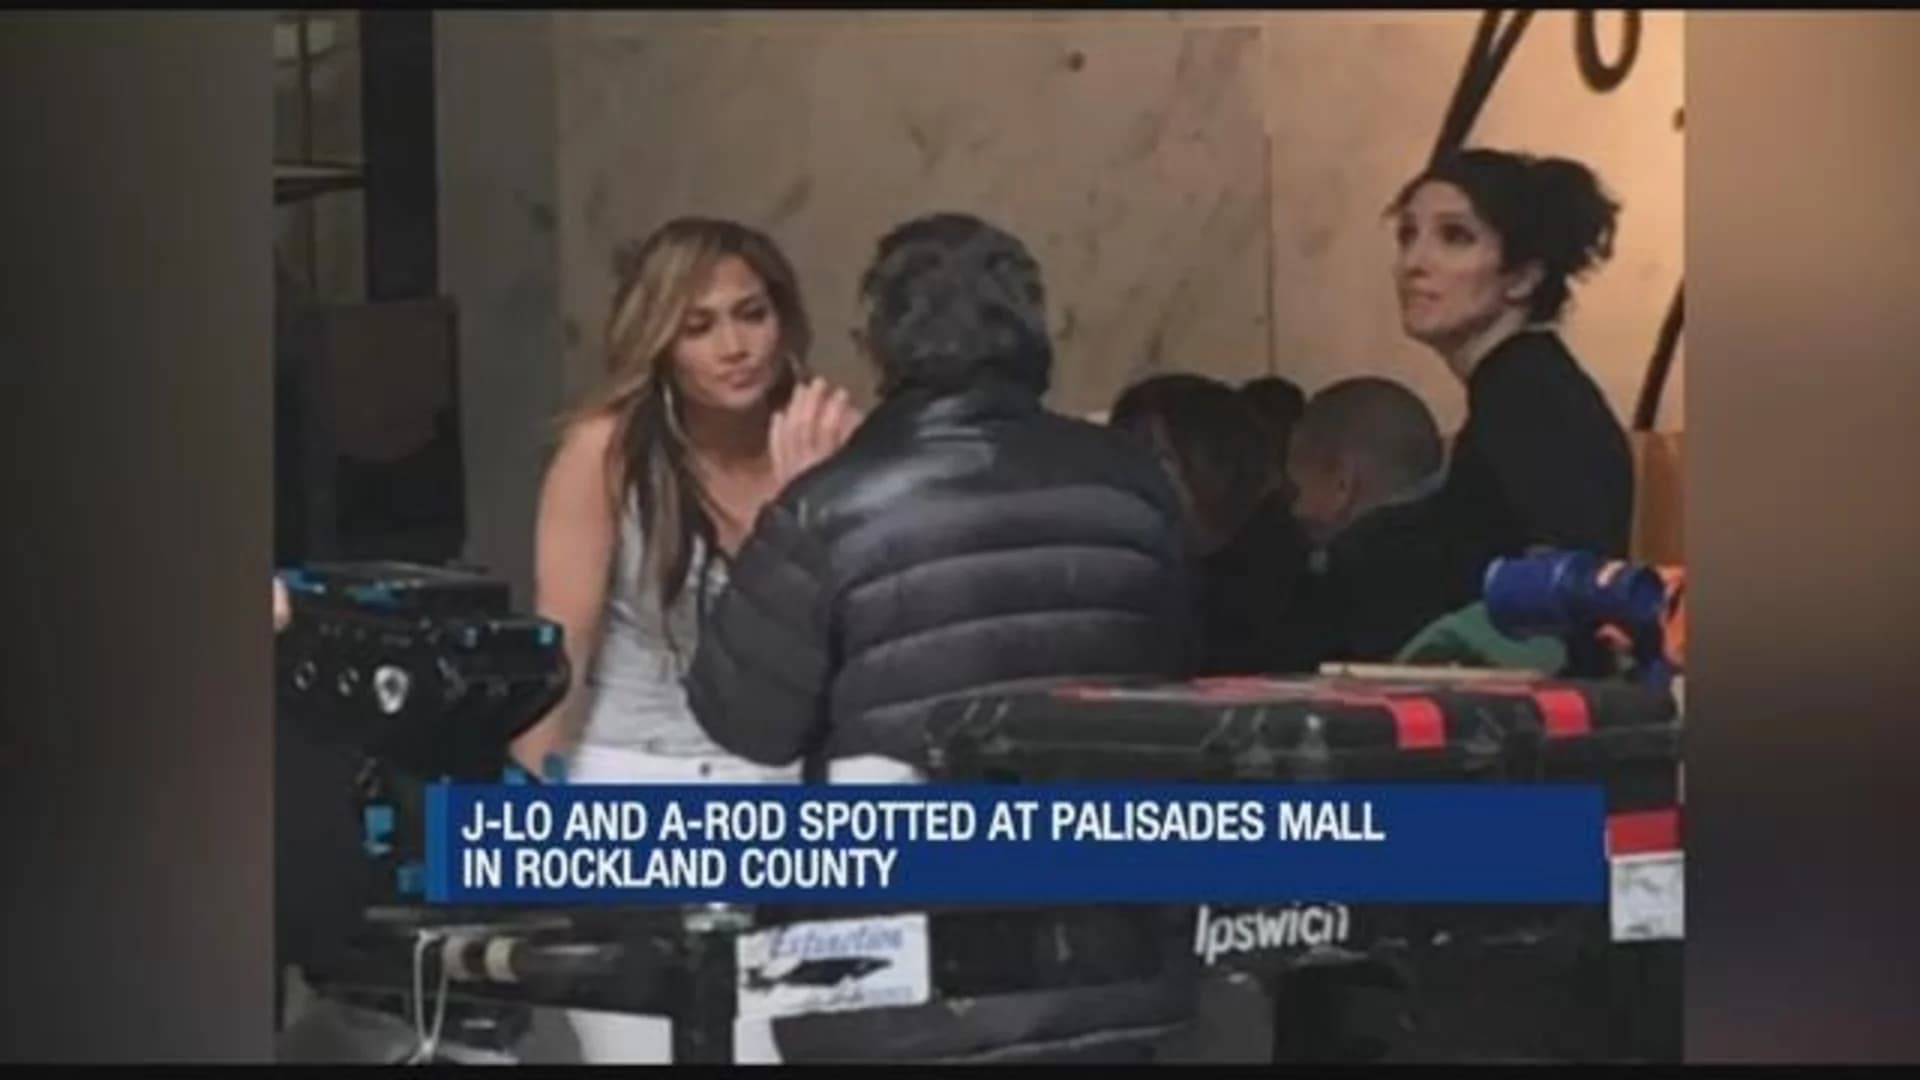 Caught on camera: J-Lo and A-Rod spotted at Palisades Mall